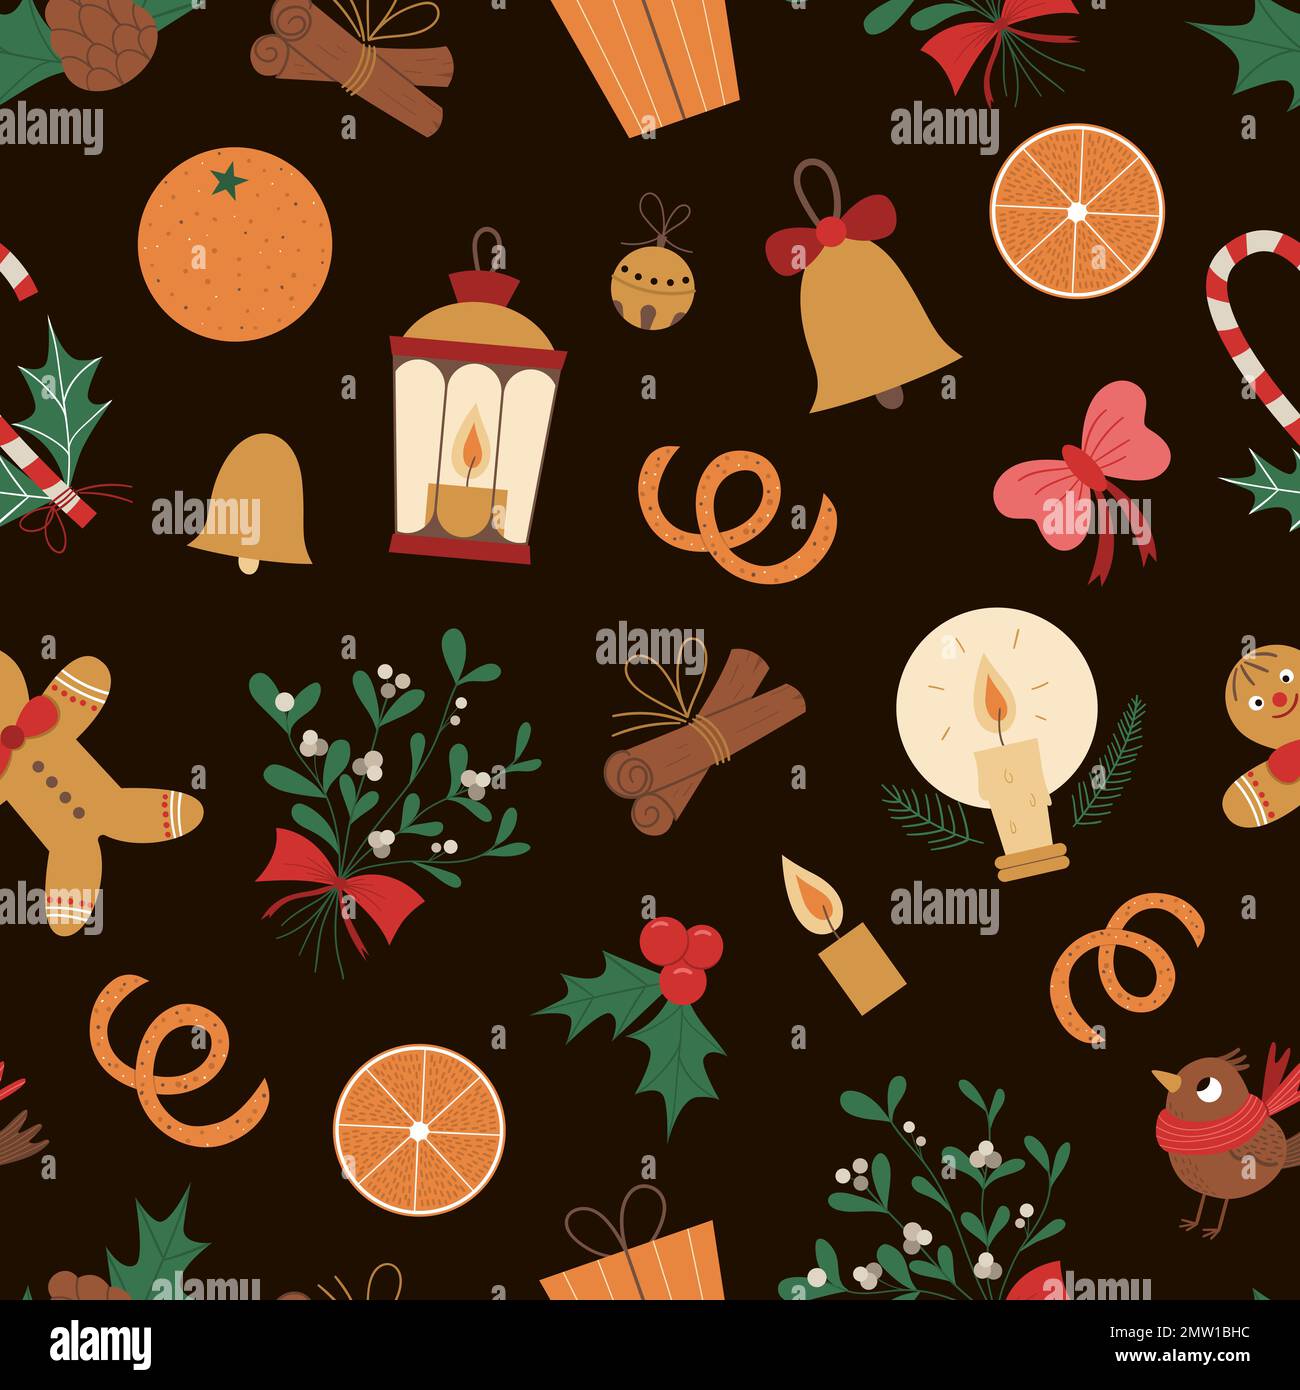 Vector seamless pattern of Christmas elements with lantern, gingerbread man, orange, mistletoe, candle on black background. Cute funny repeat texture Stock Vector